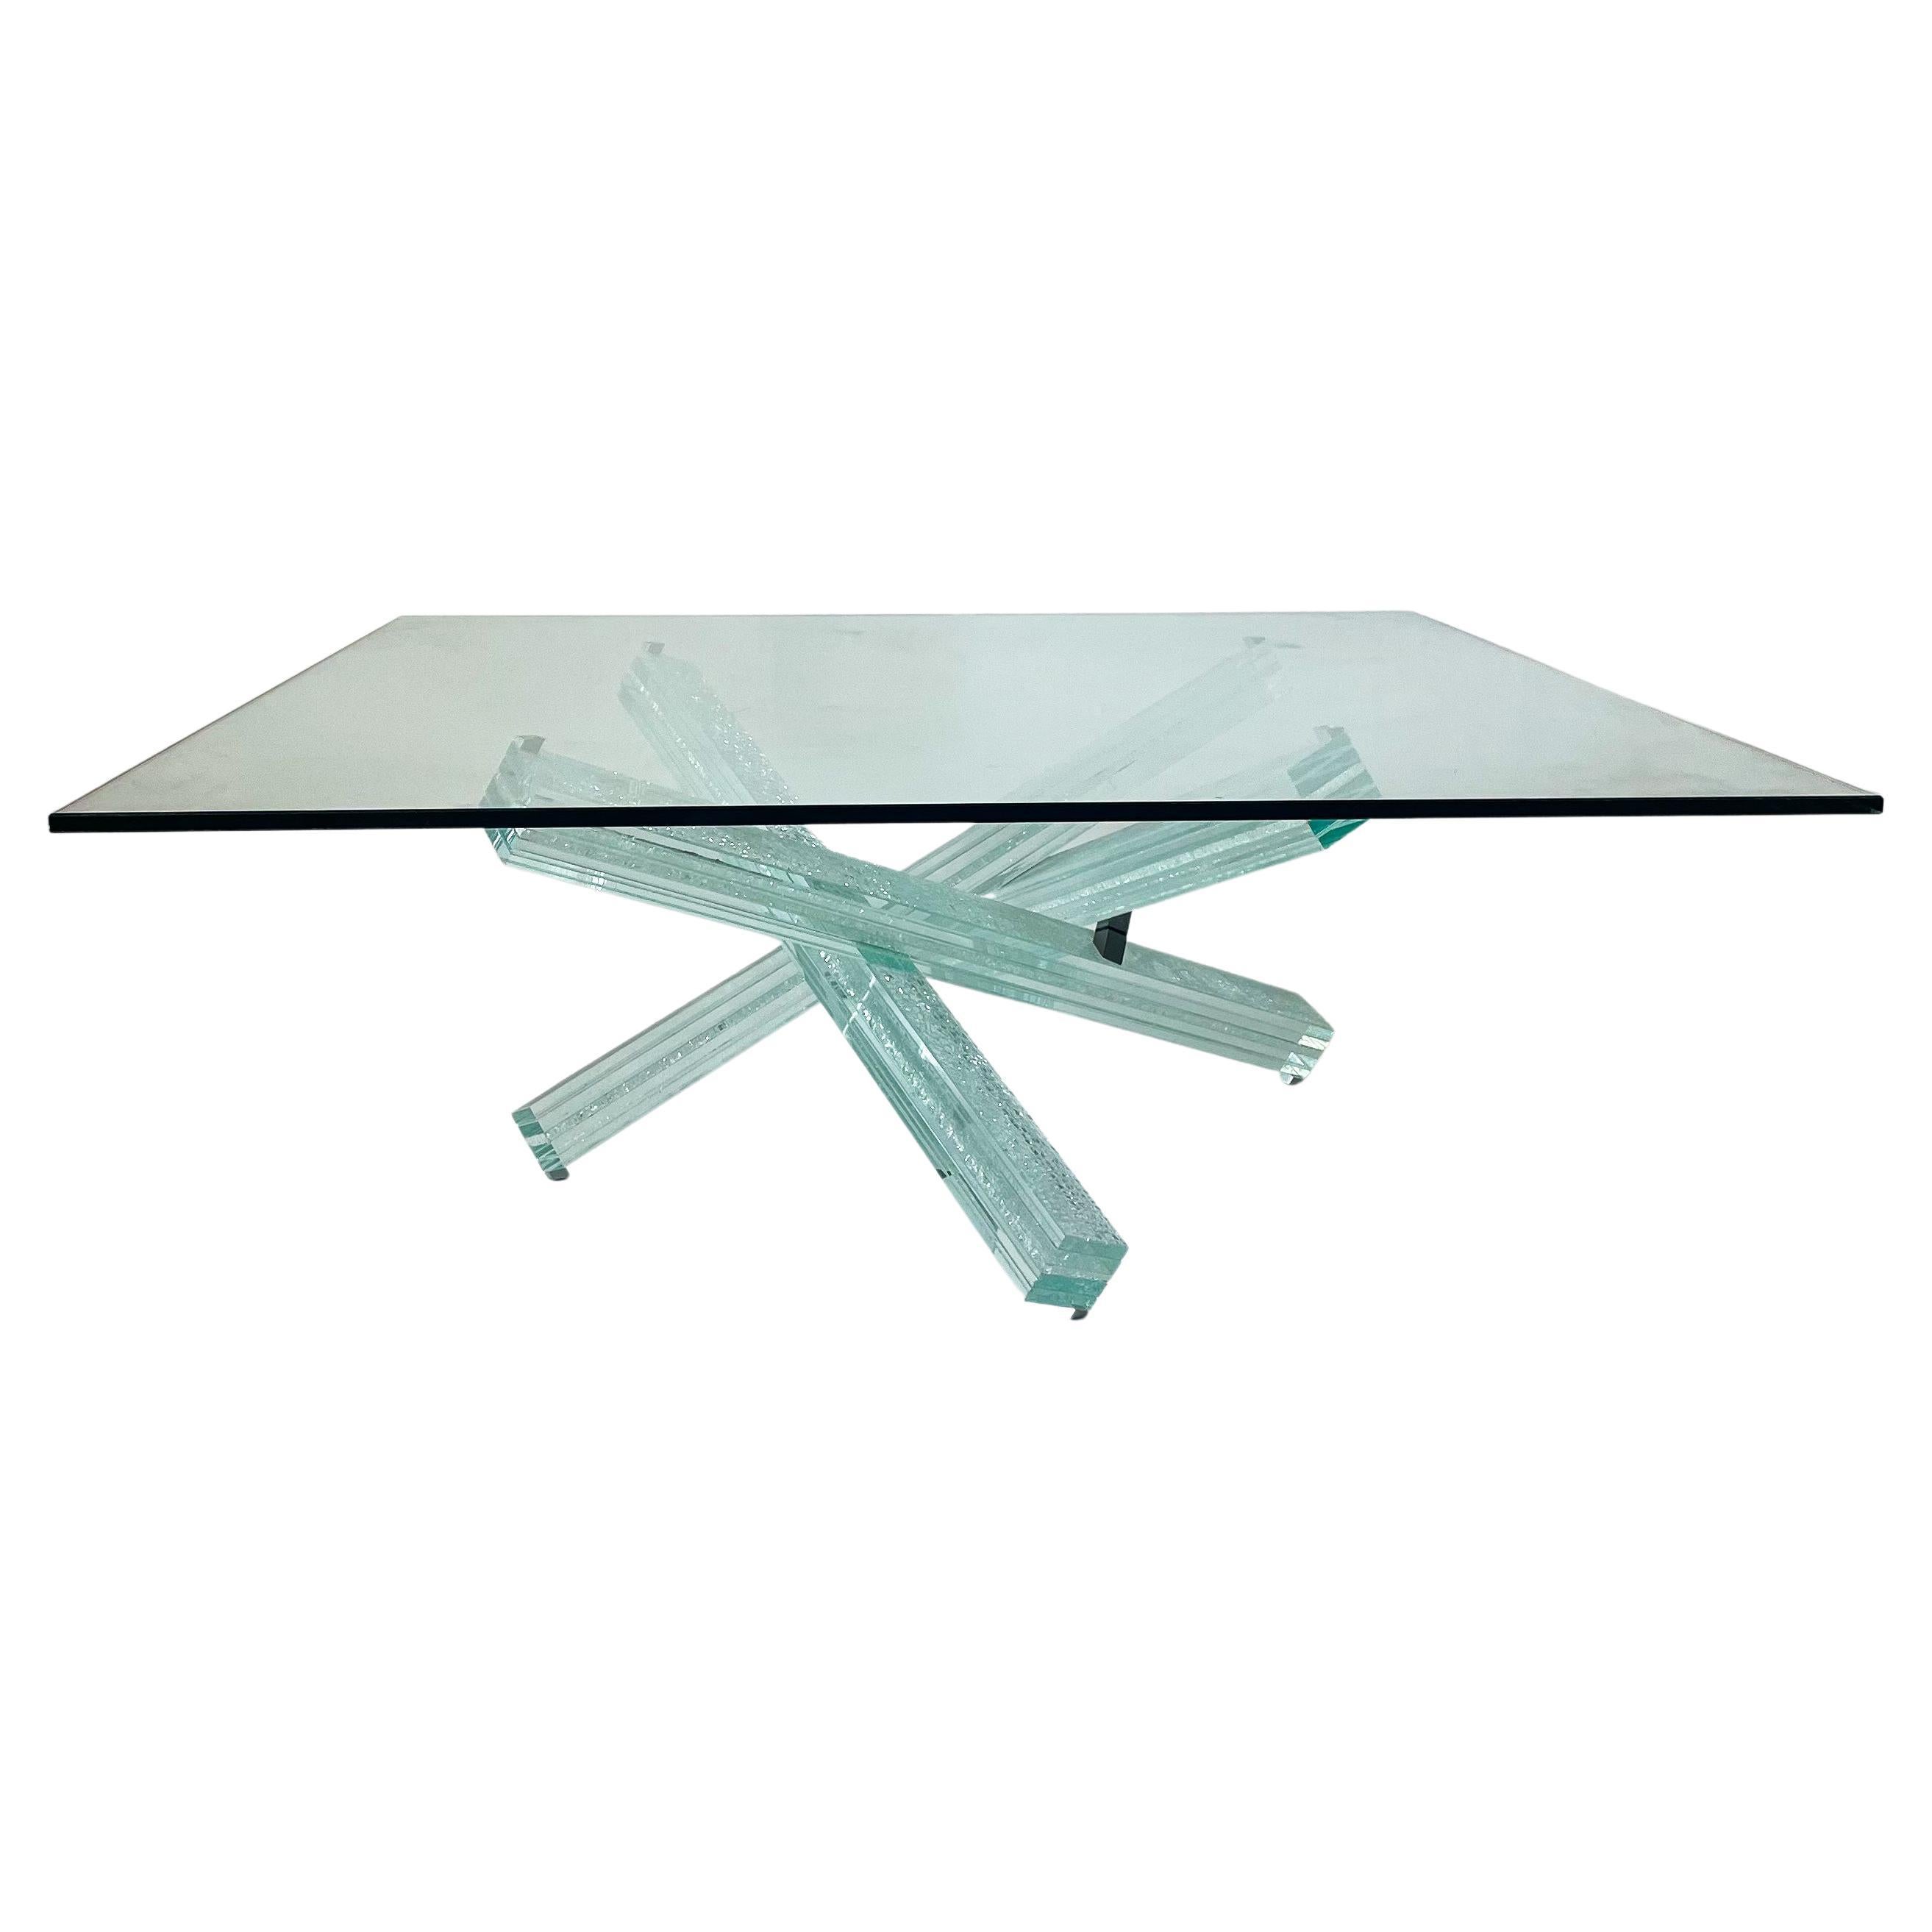 Roche Bobois “Mikado” coffee table by Maurice Barilone